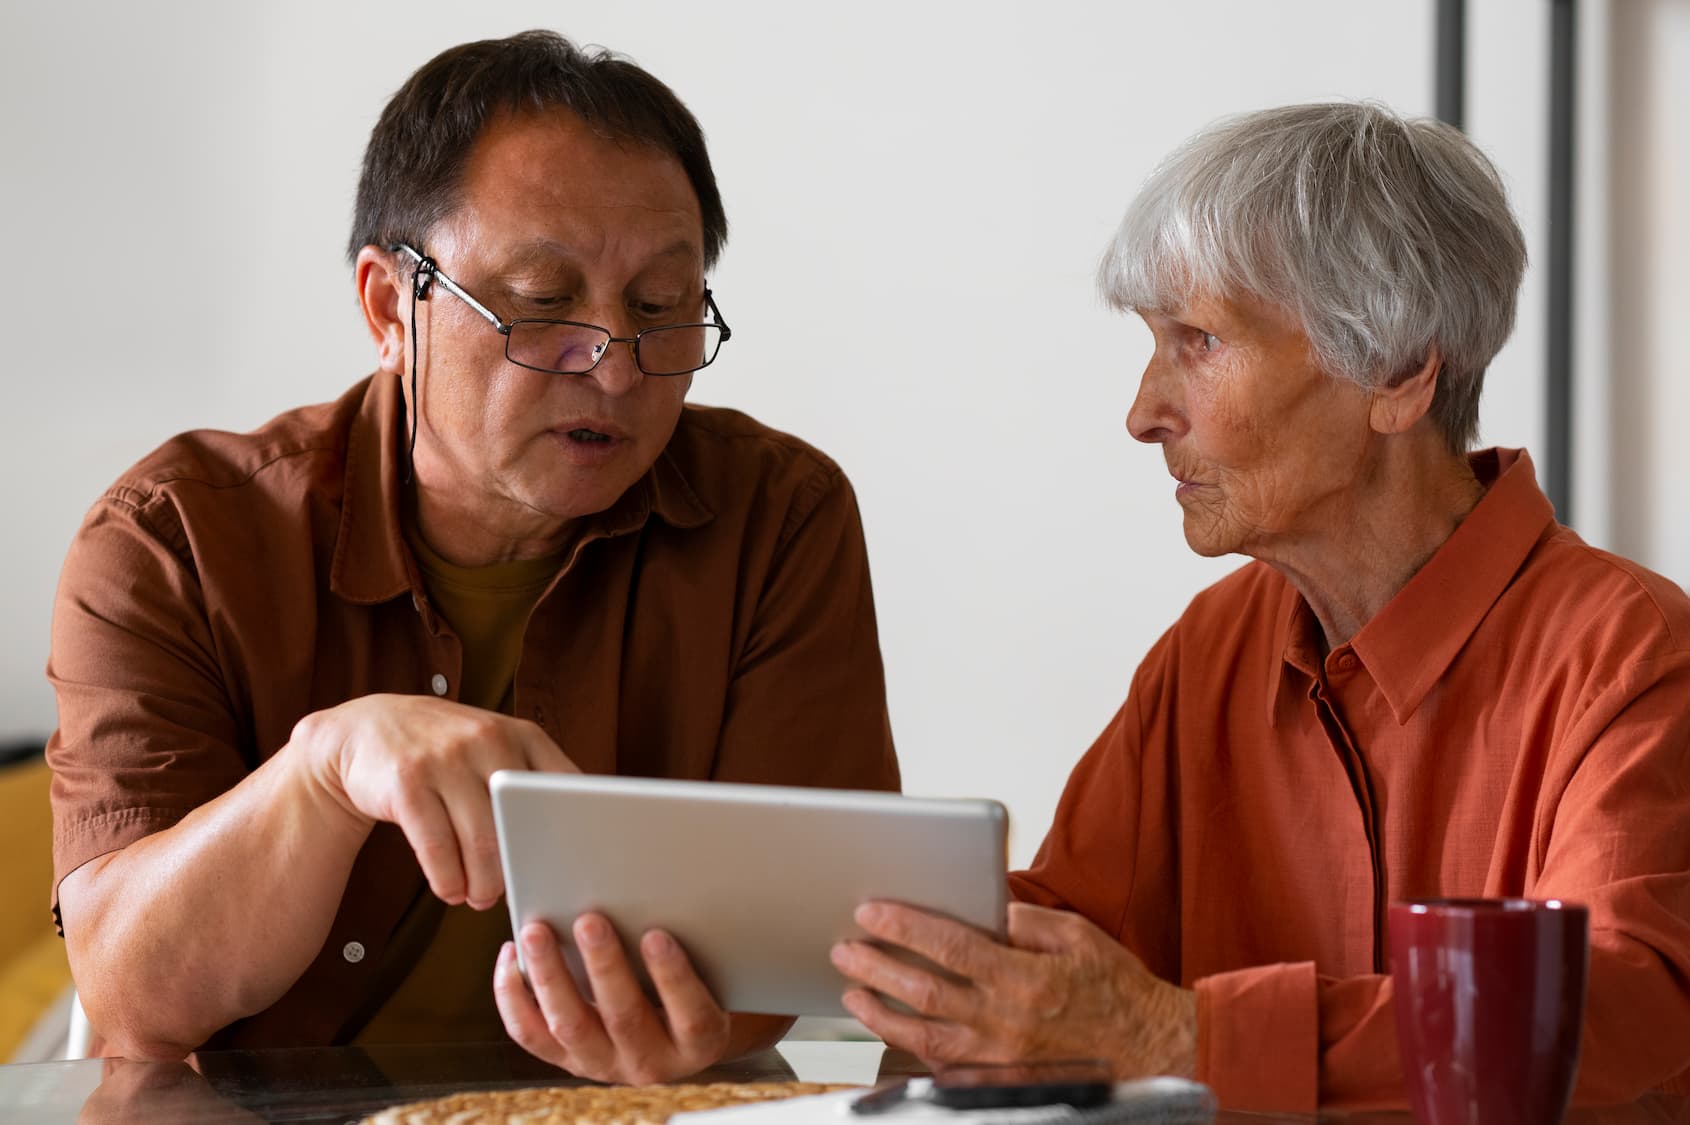 Elderly man teaching elderly woman how to use tech devices